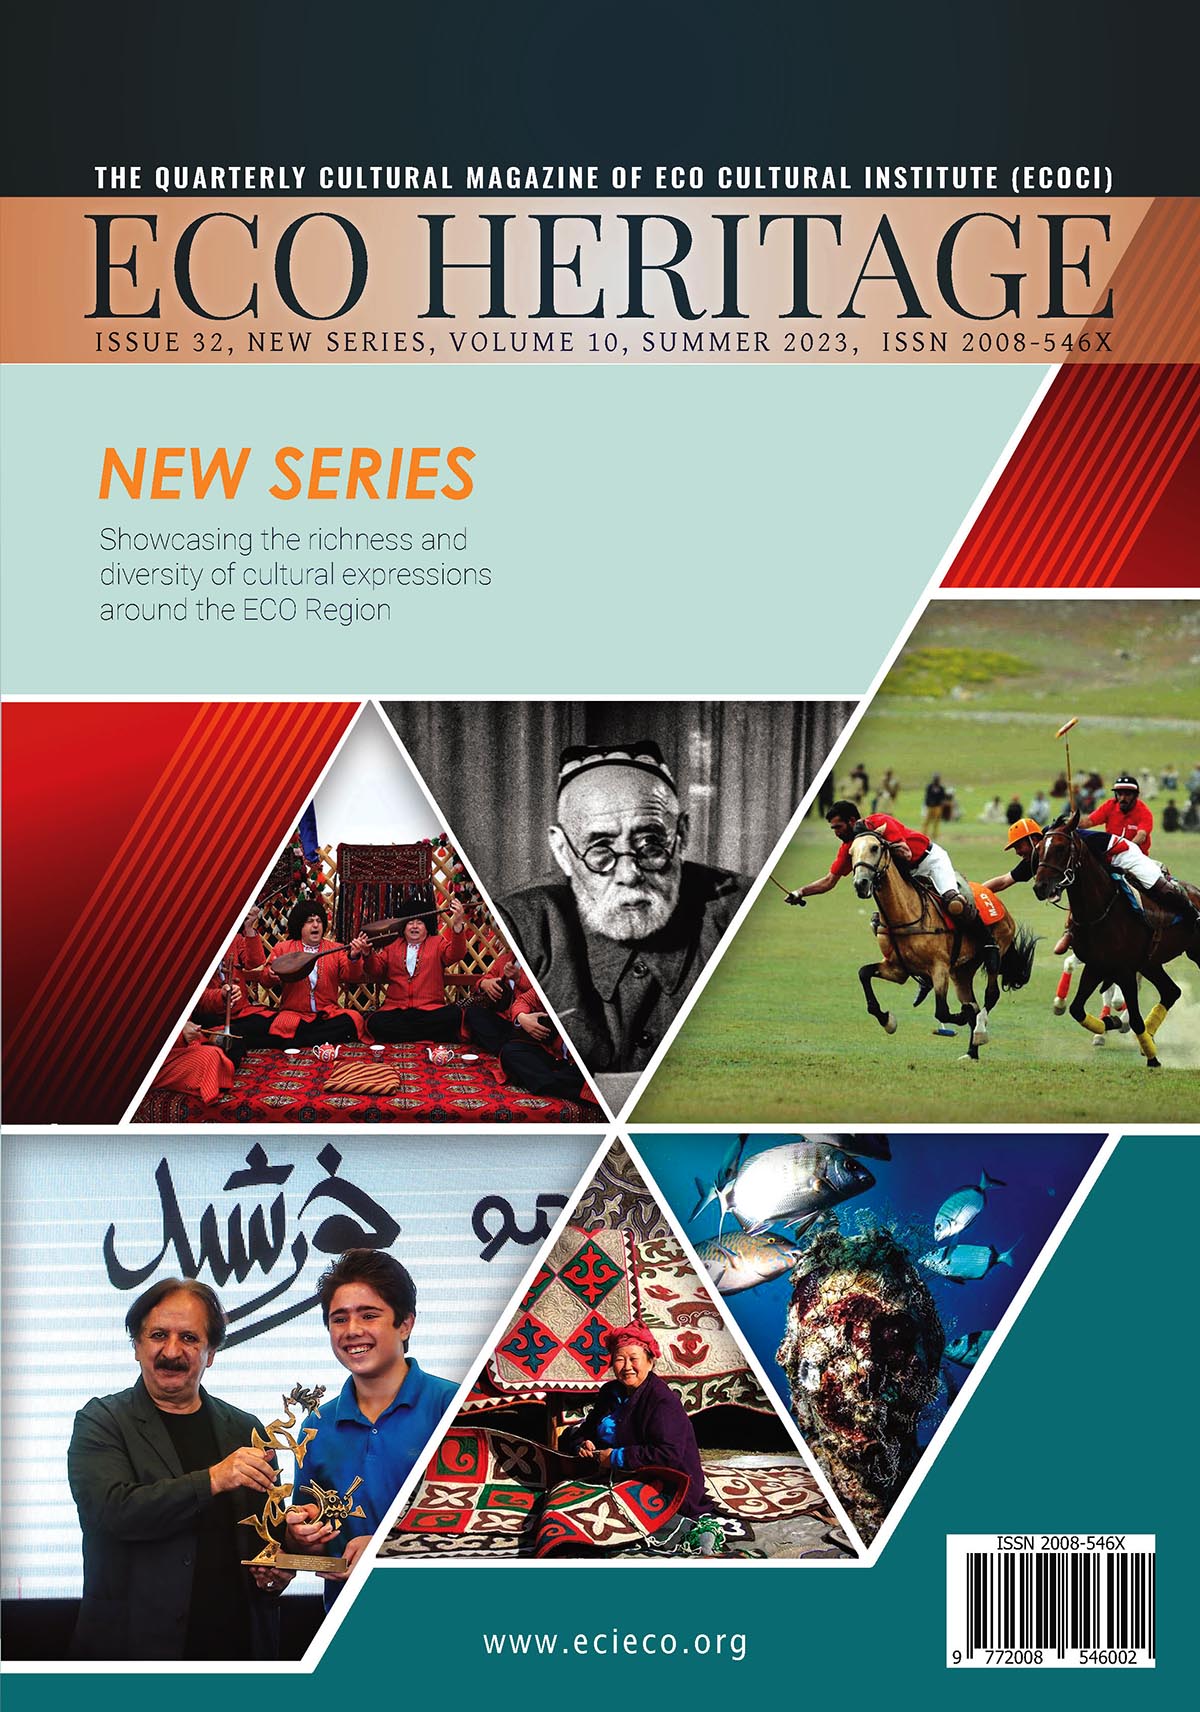 The 32nd issue of ECO Heritage quarterly magazine has been published